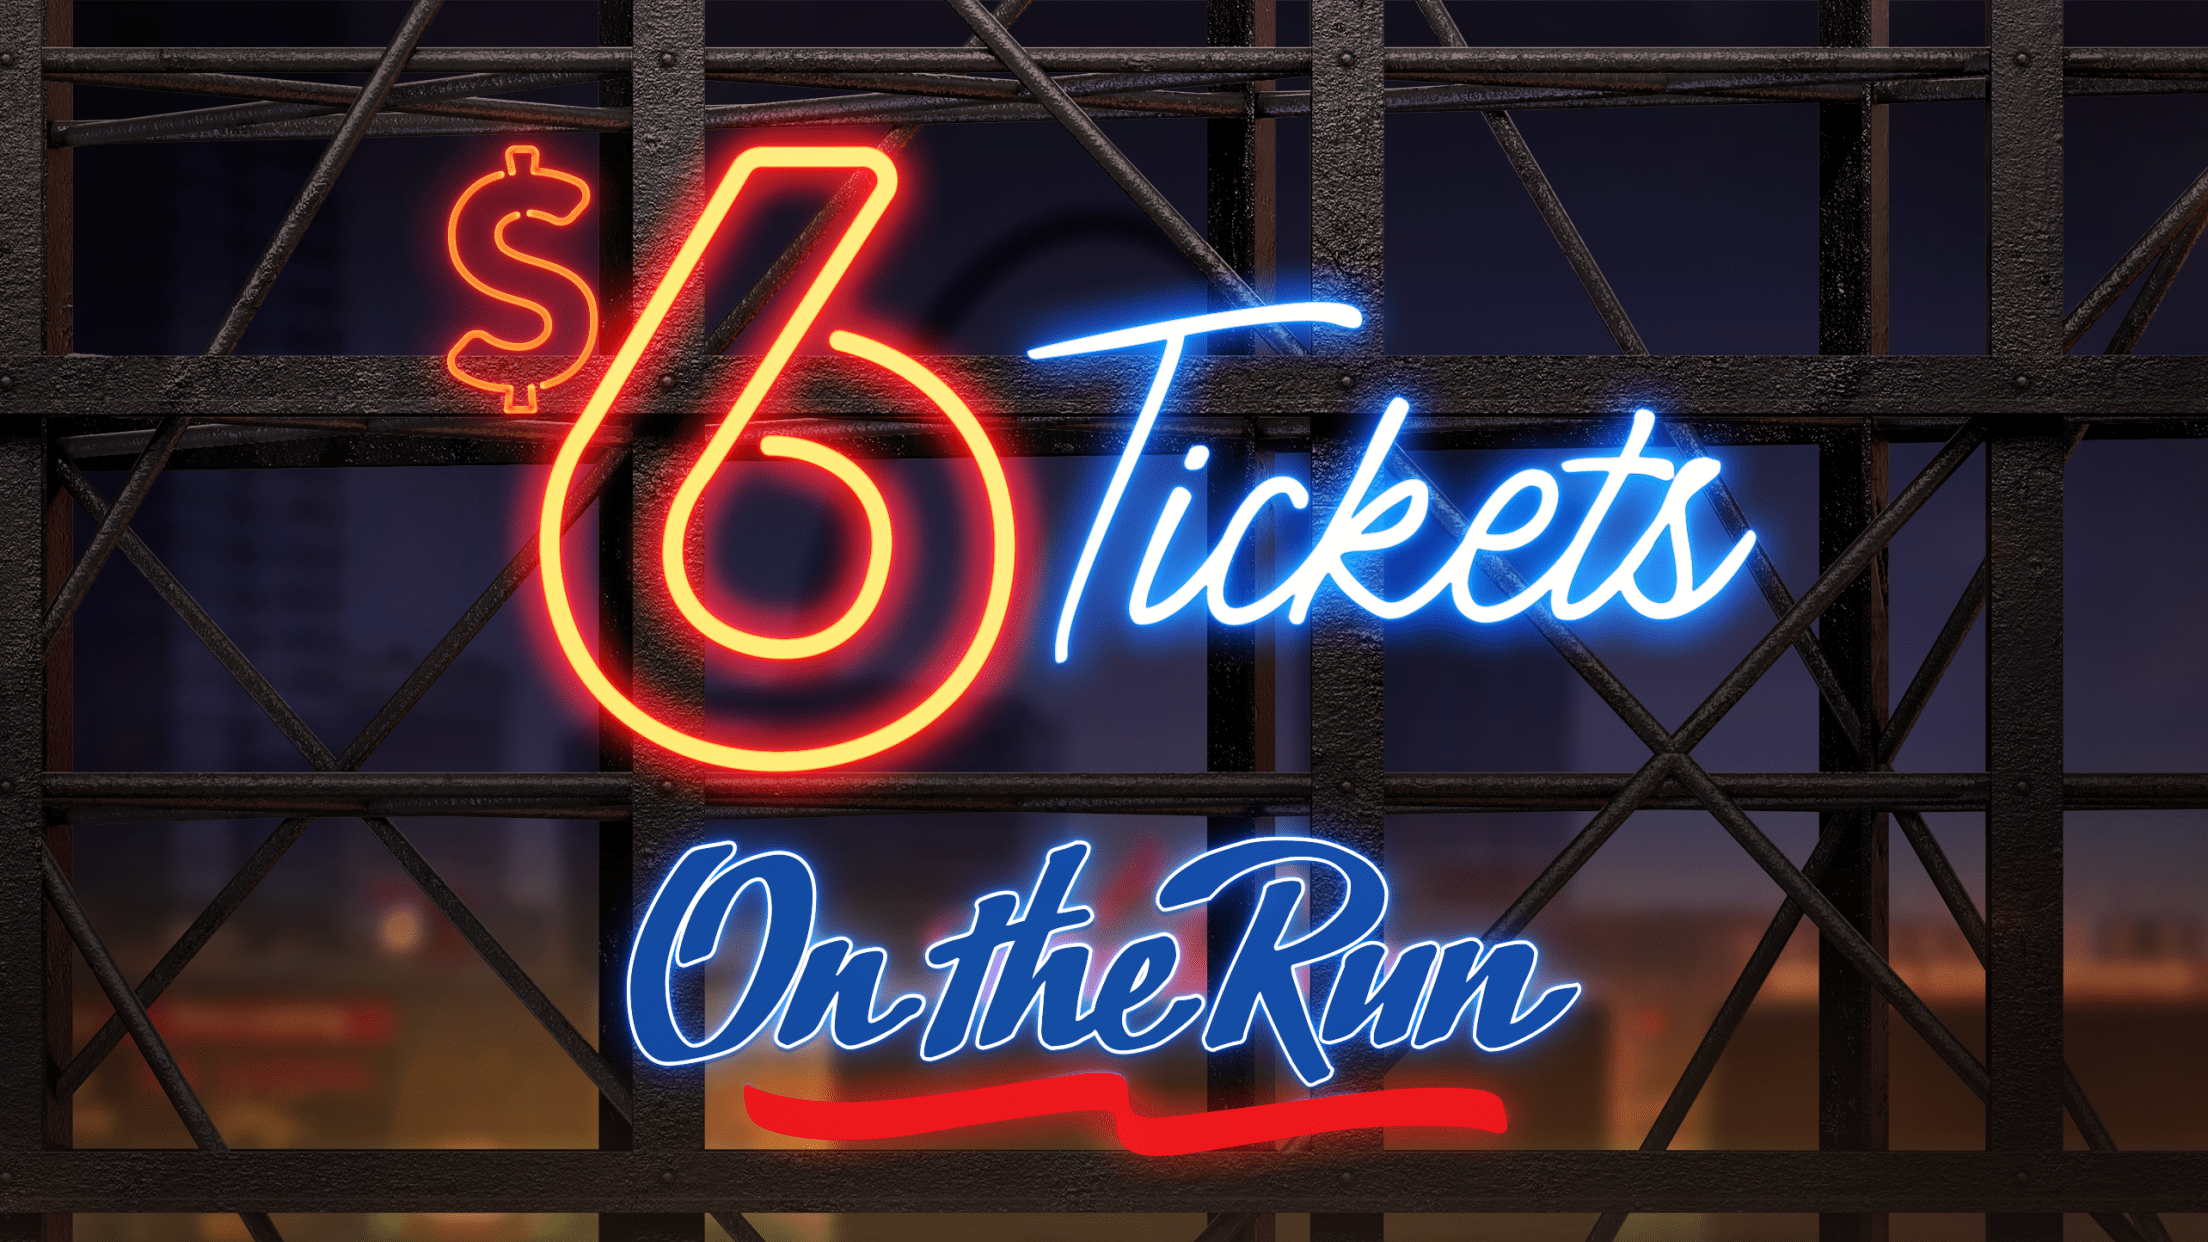 $6 Cardinals tickets up for grabs during flash sale Wednesday